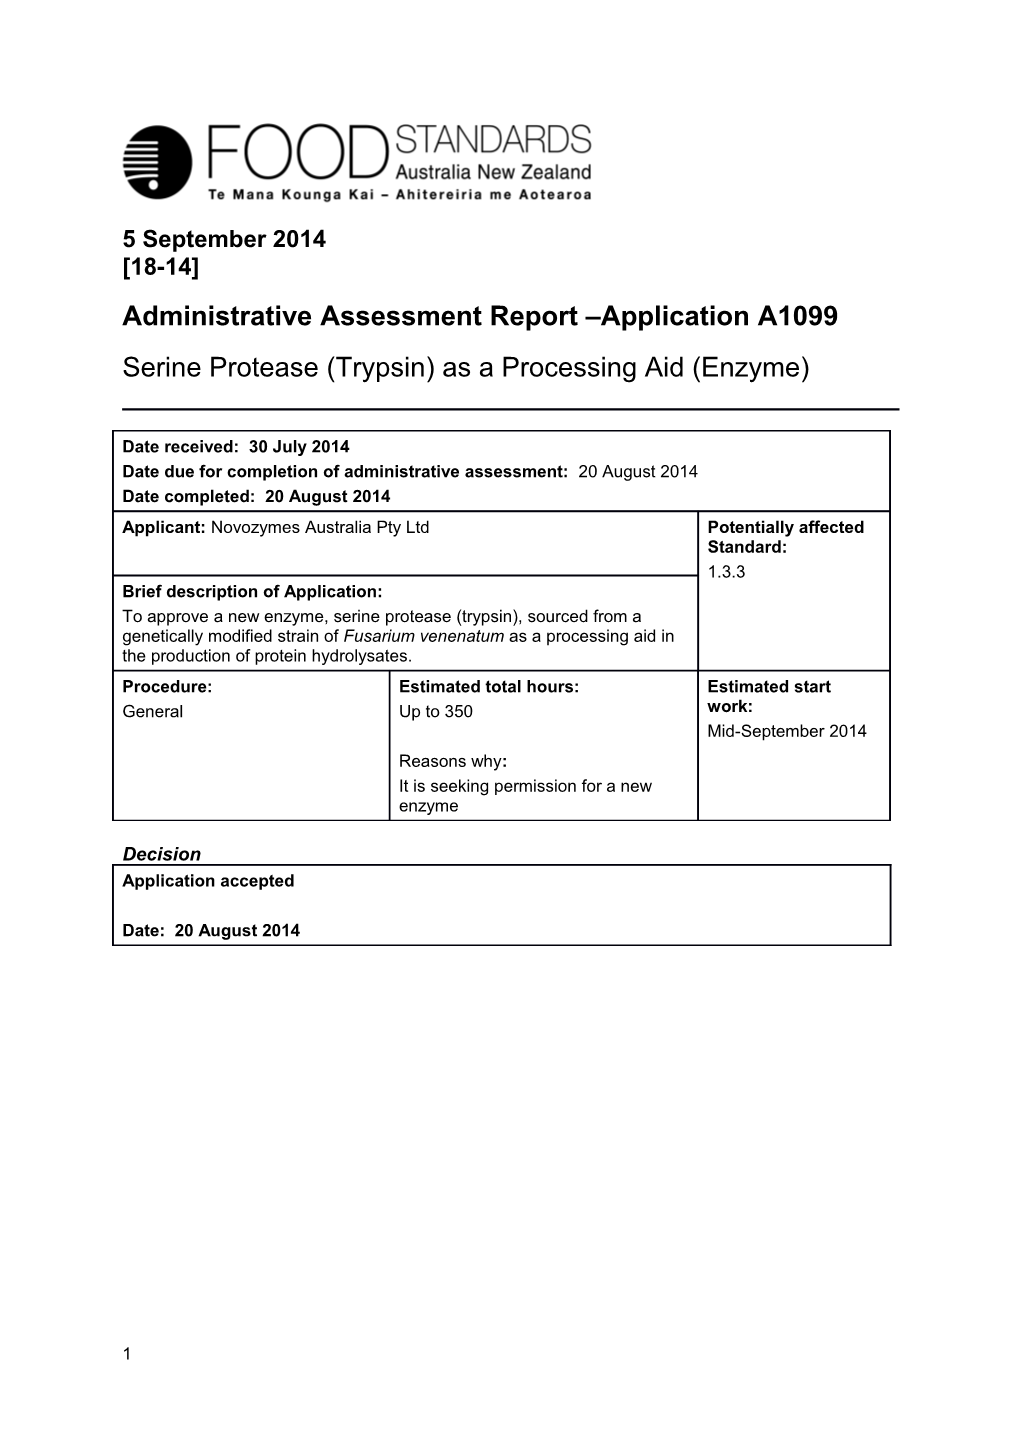 Administrative Assessment Report Application A1099